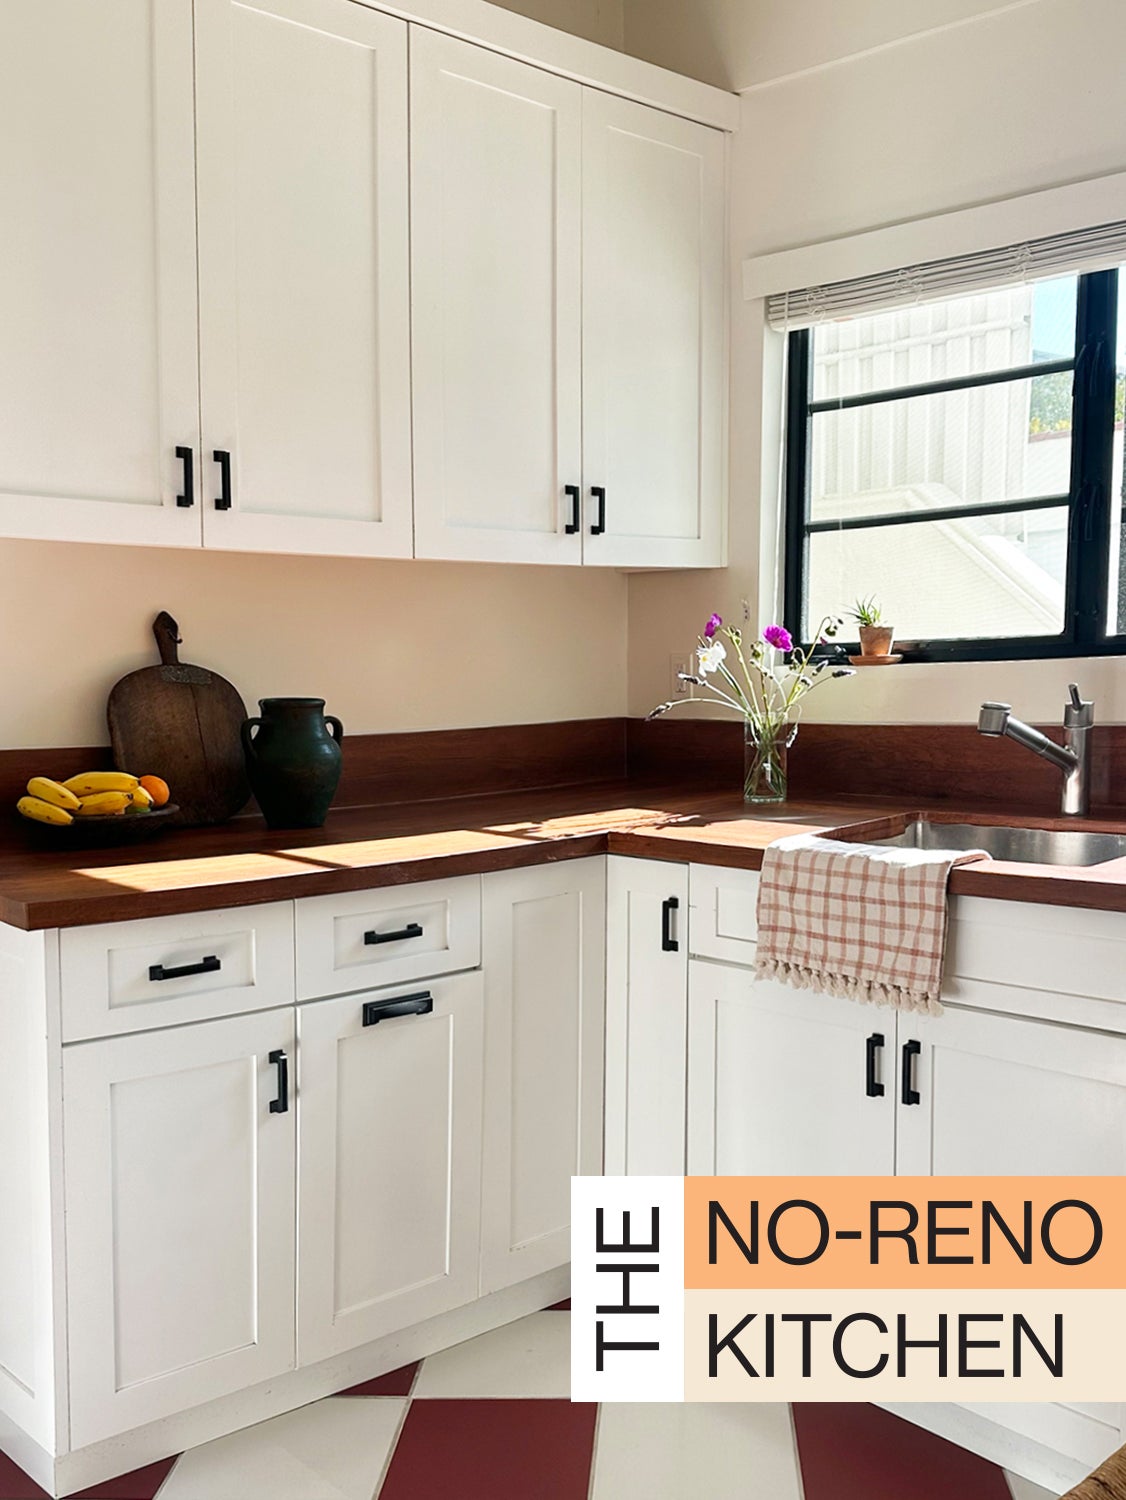 graphic with the no-reno kitchen